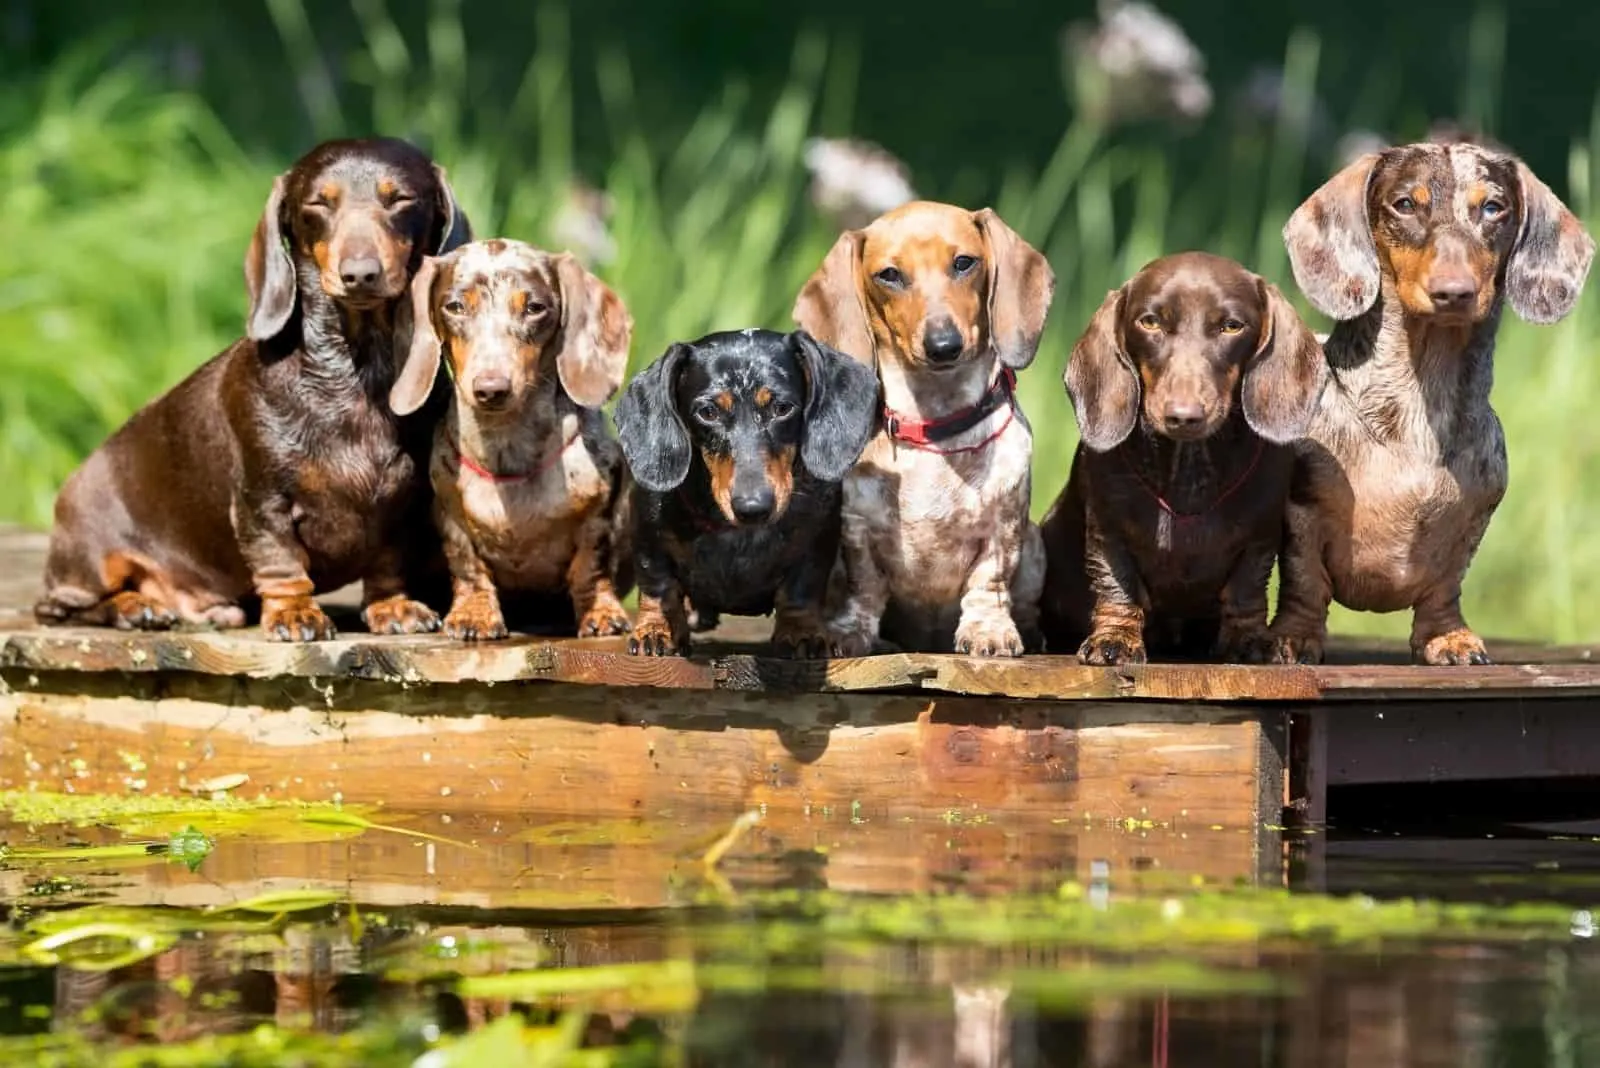 group dog dachshund sits by wooden platform near the water